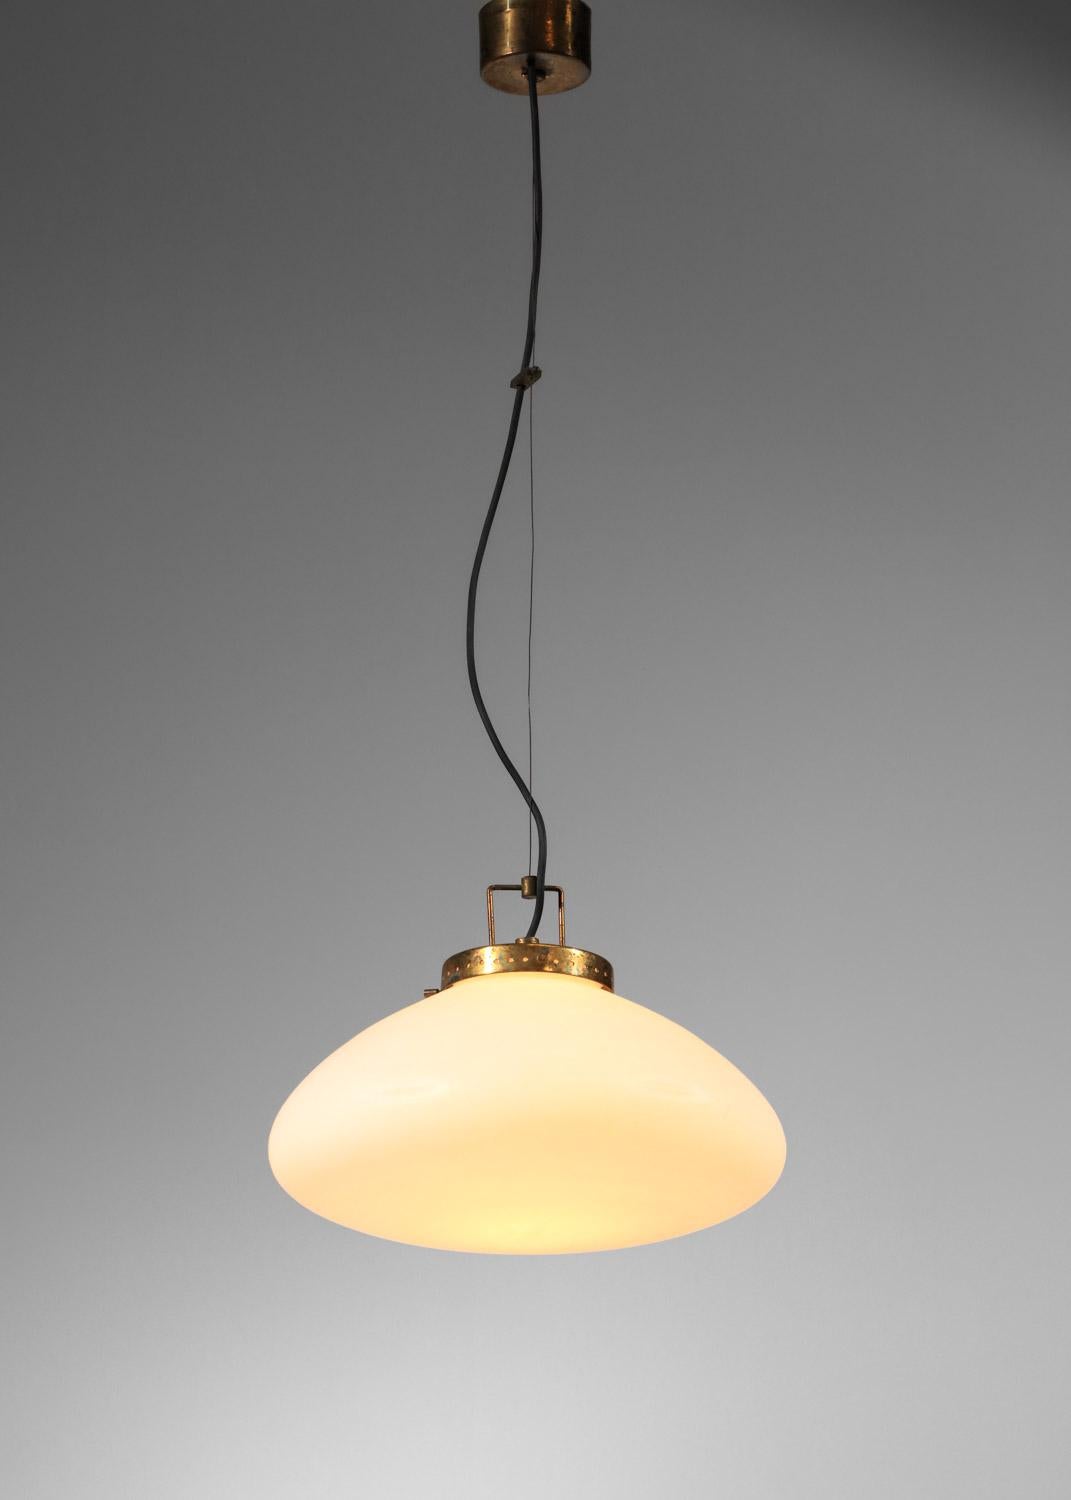 Italian hanging lamp from the 50s, attributed to the Stilnovo publishing house. Saucer-shaped lampshade in opaque white opaline, hanging system and ceiling canopy in solid brass. The overall height of the chandelier can be adjusted using the hanging